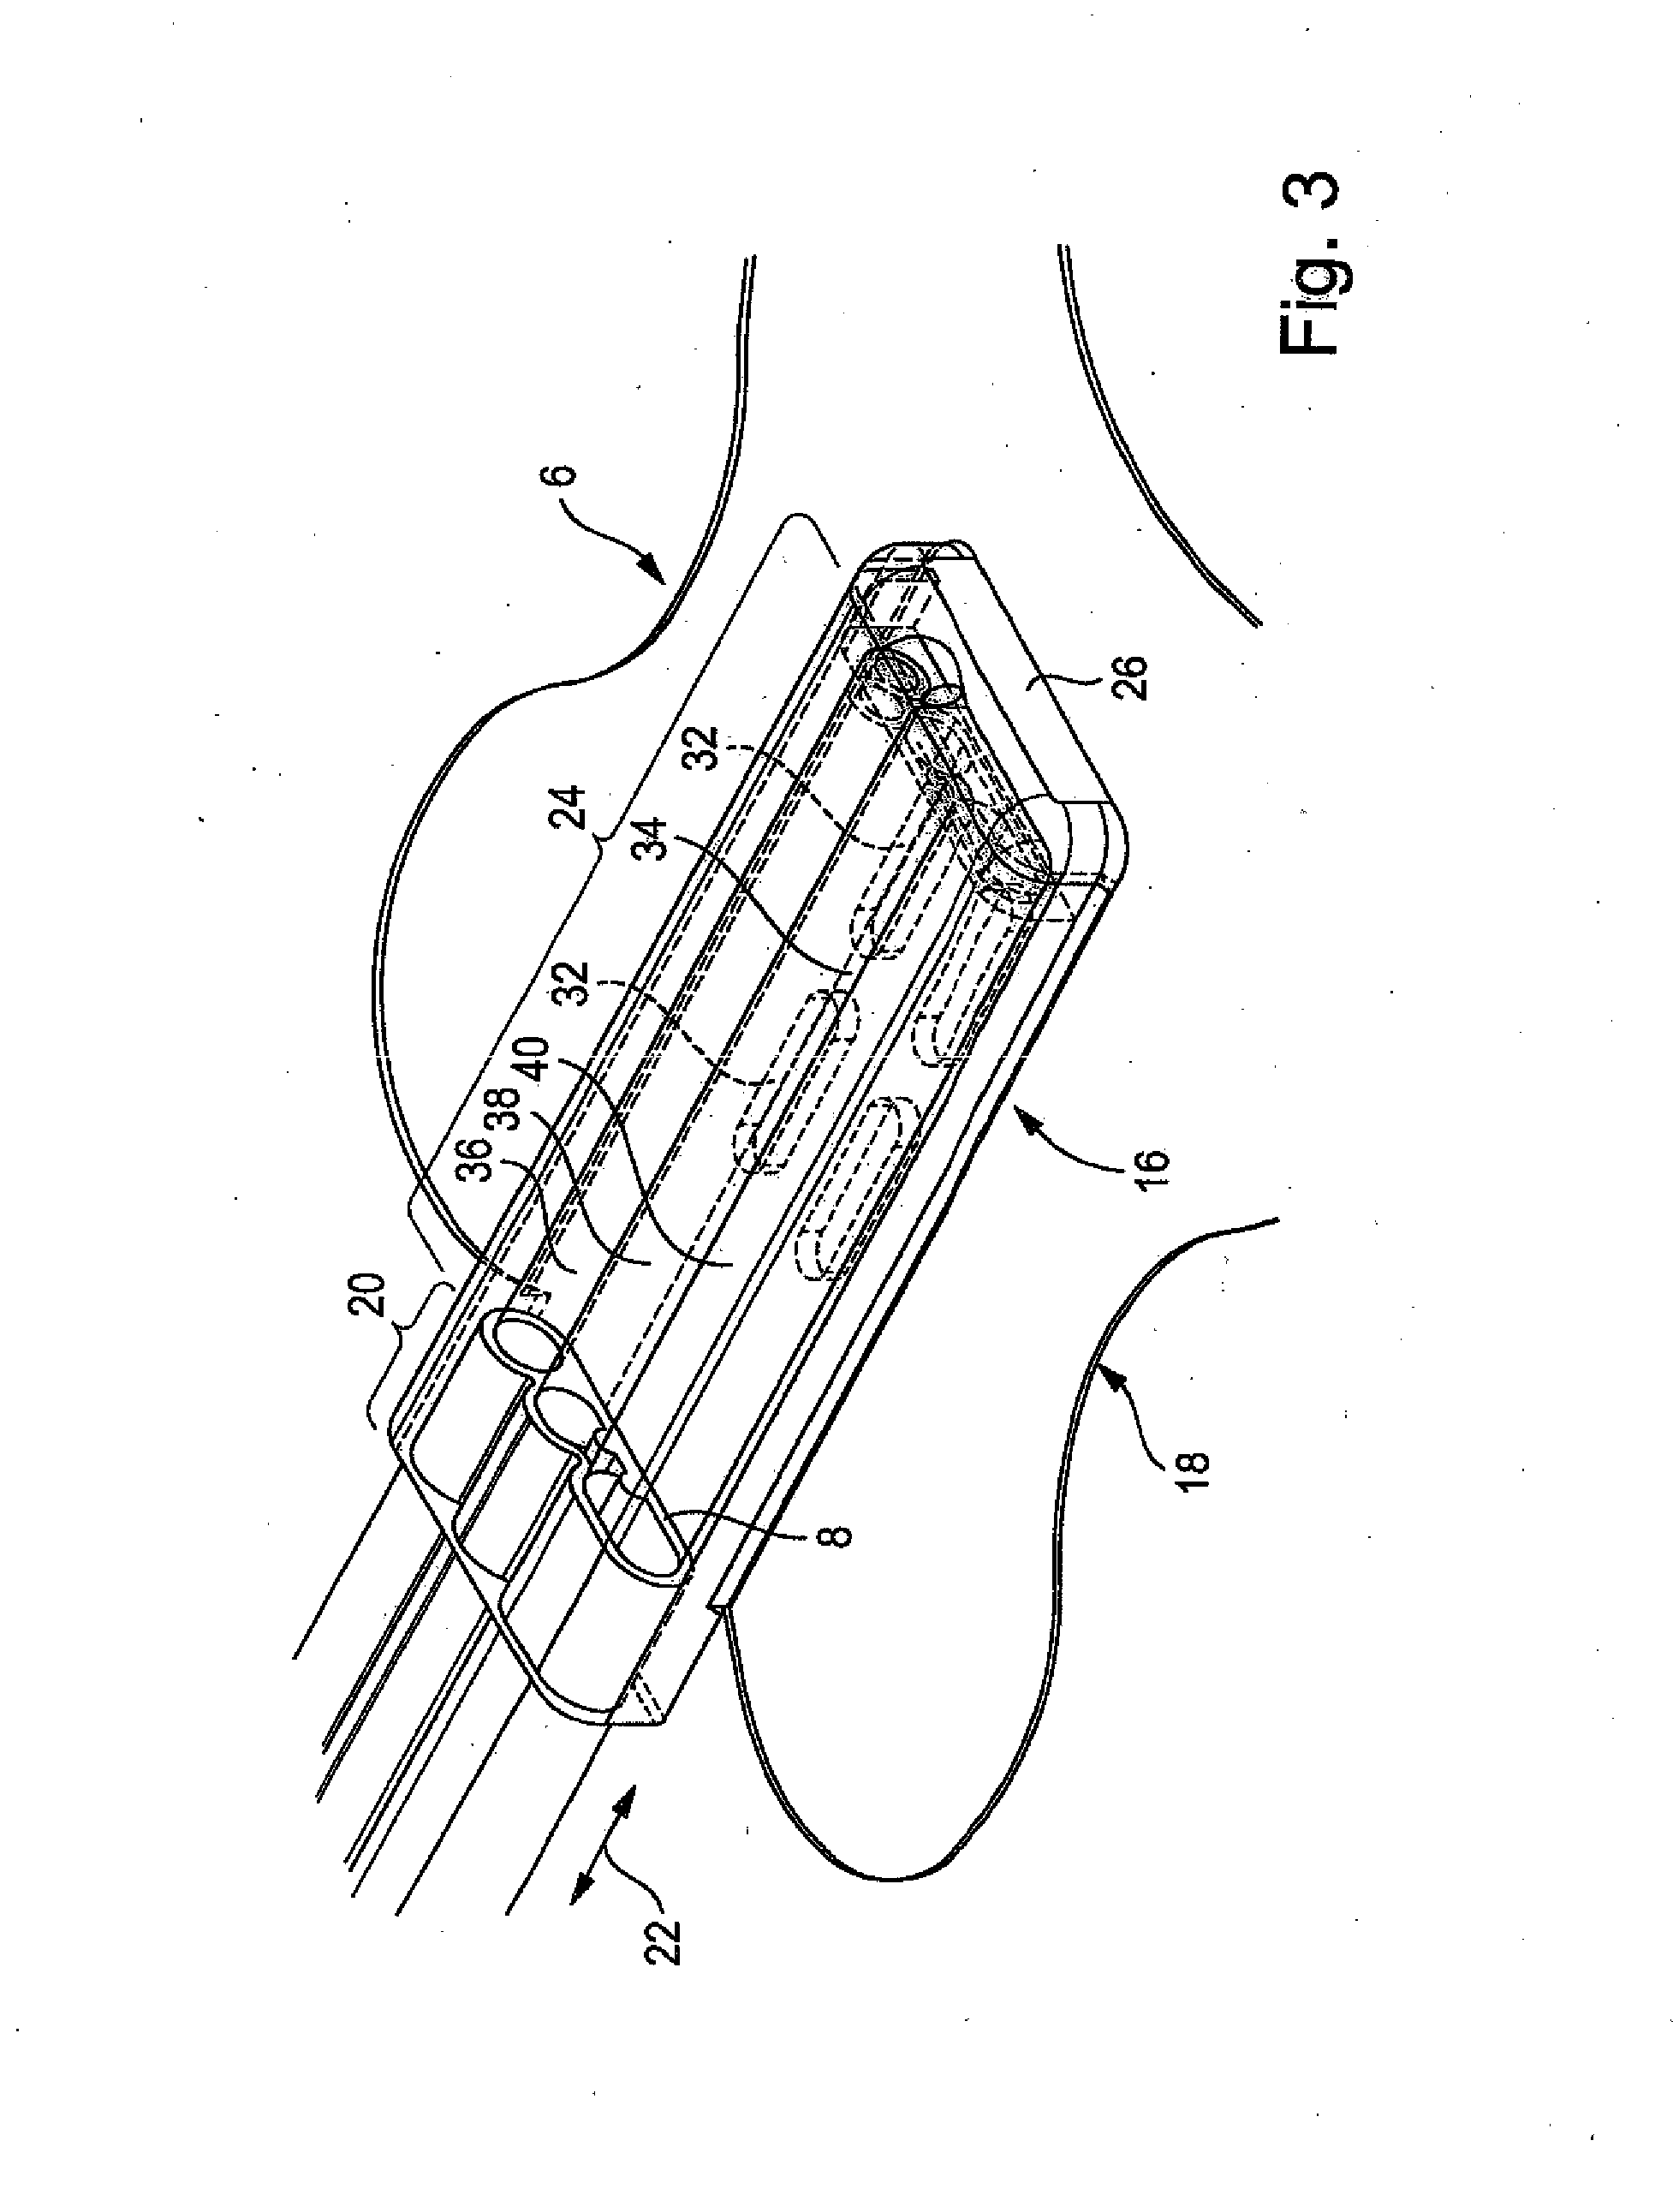 Method for producing a connection device for use in the negative pressure treatment of wounds